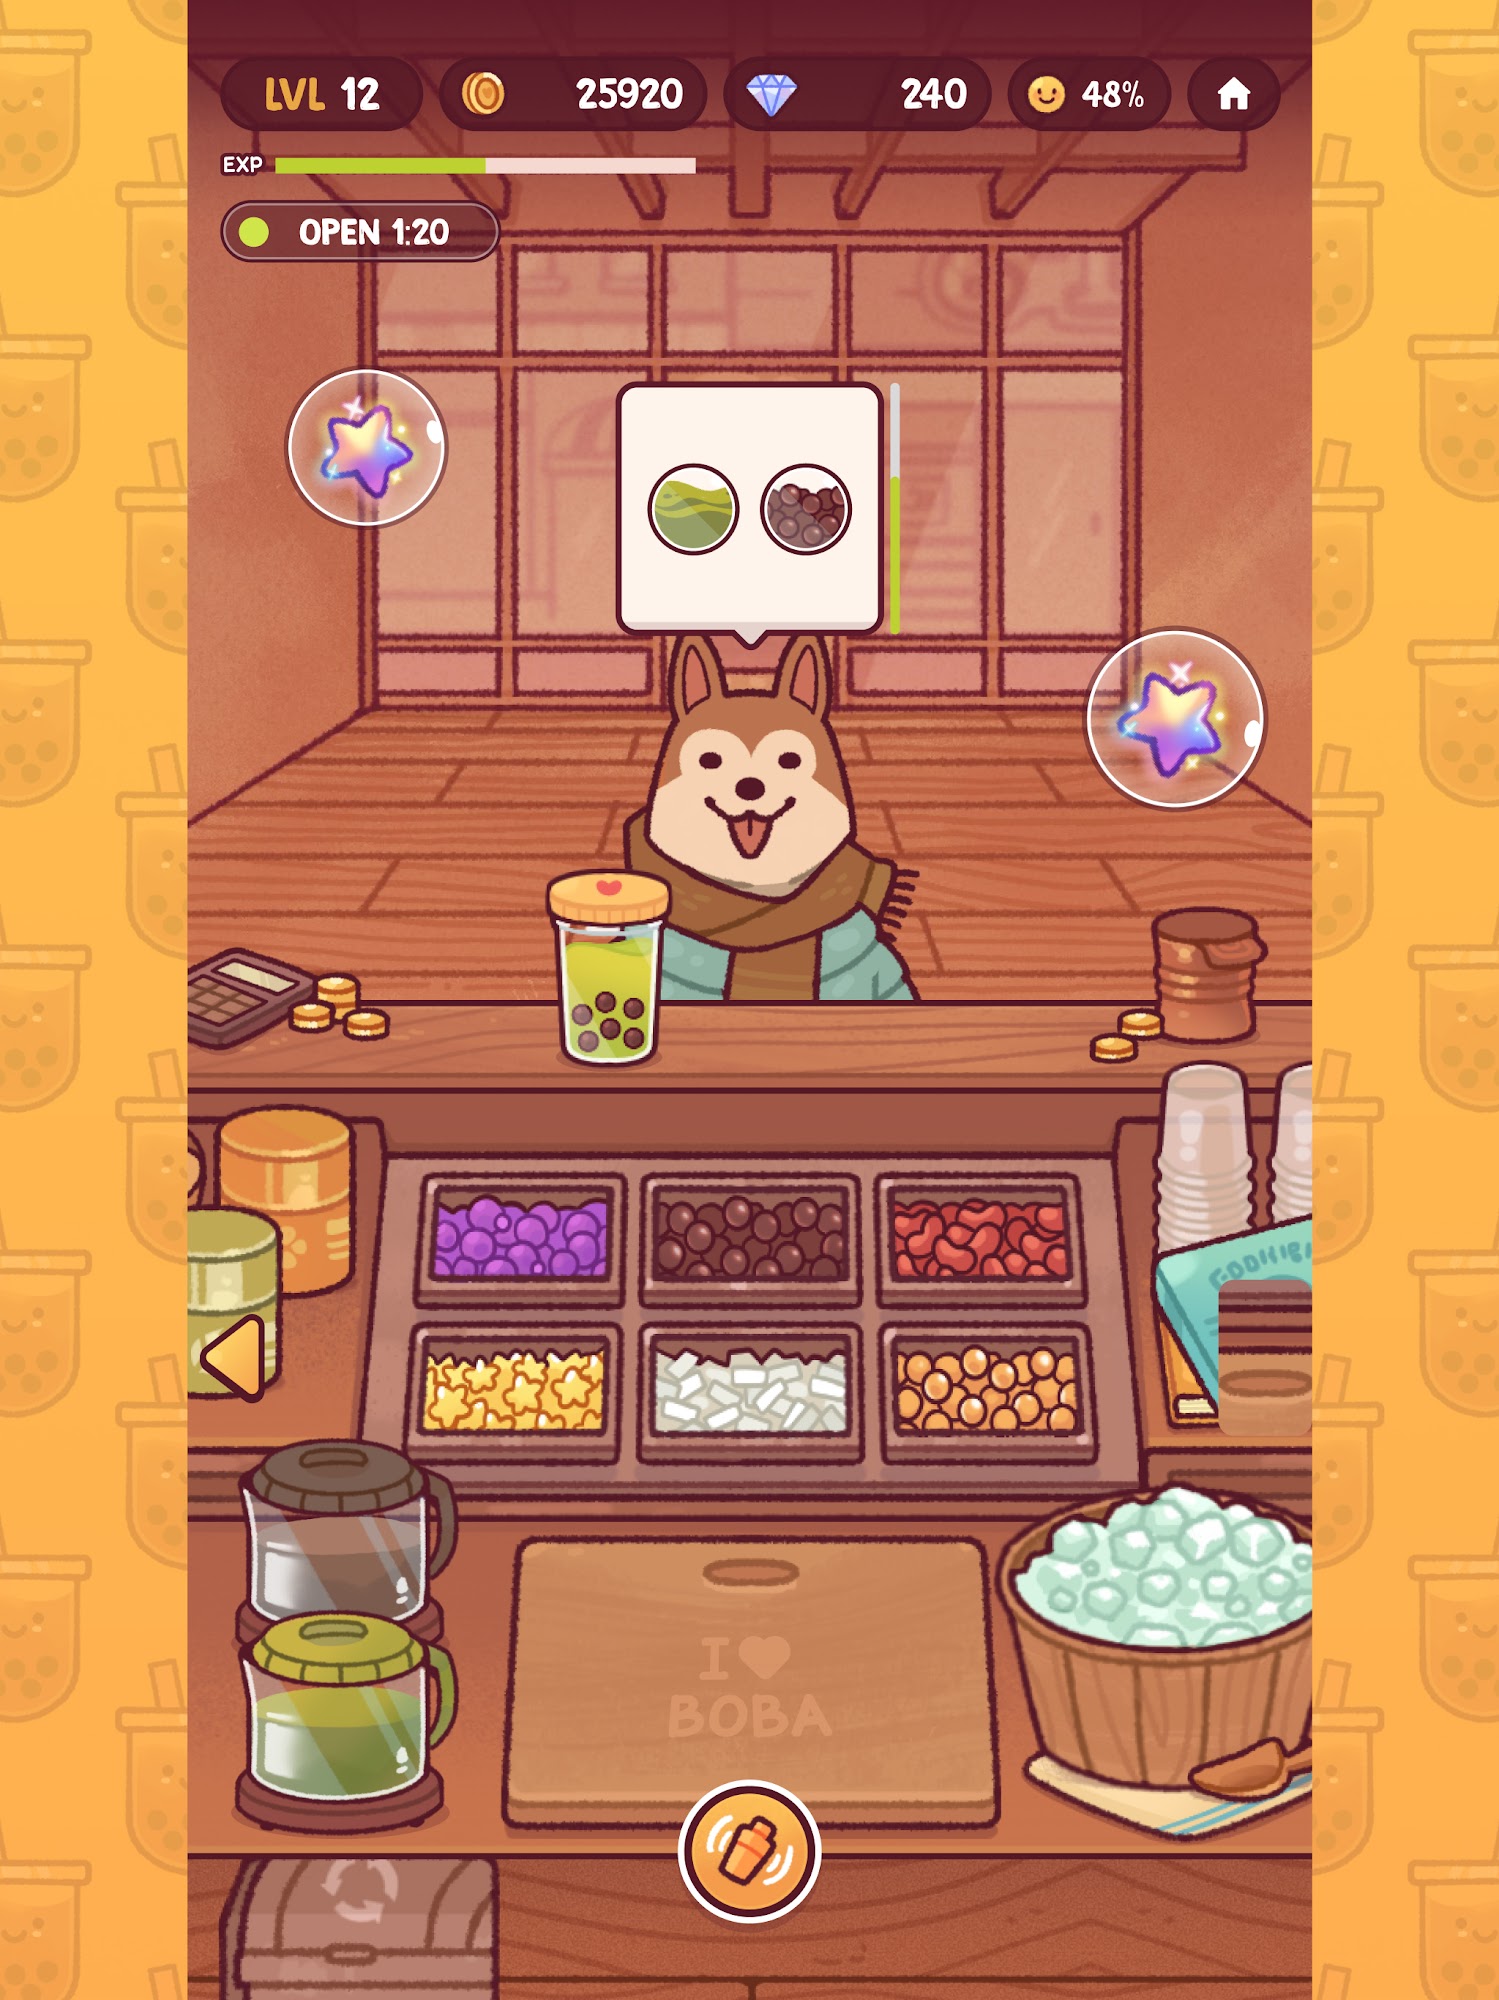 Full version of Android Cooking game apk Boba Tale for tablet and phone.